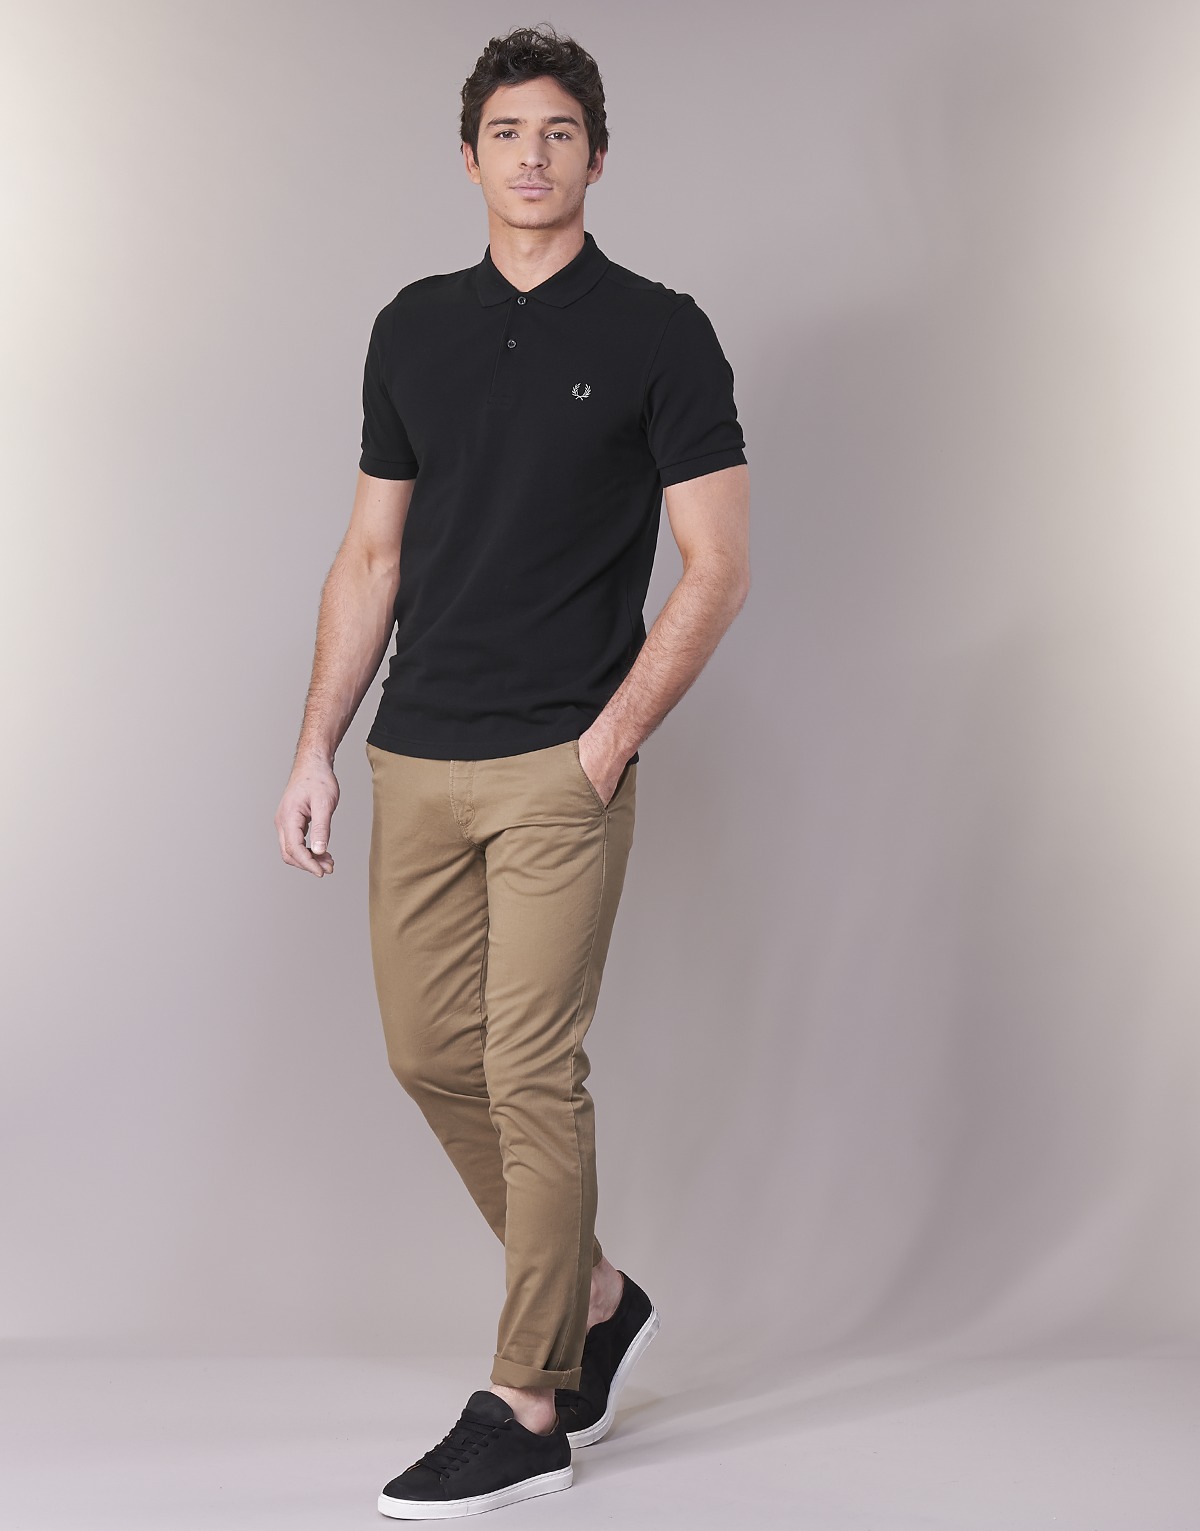 Fred Perry Noir THE FRED PERRY SHIRT GgEtnooR